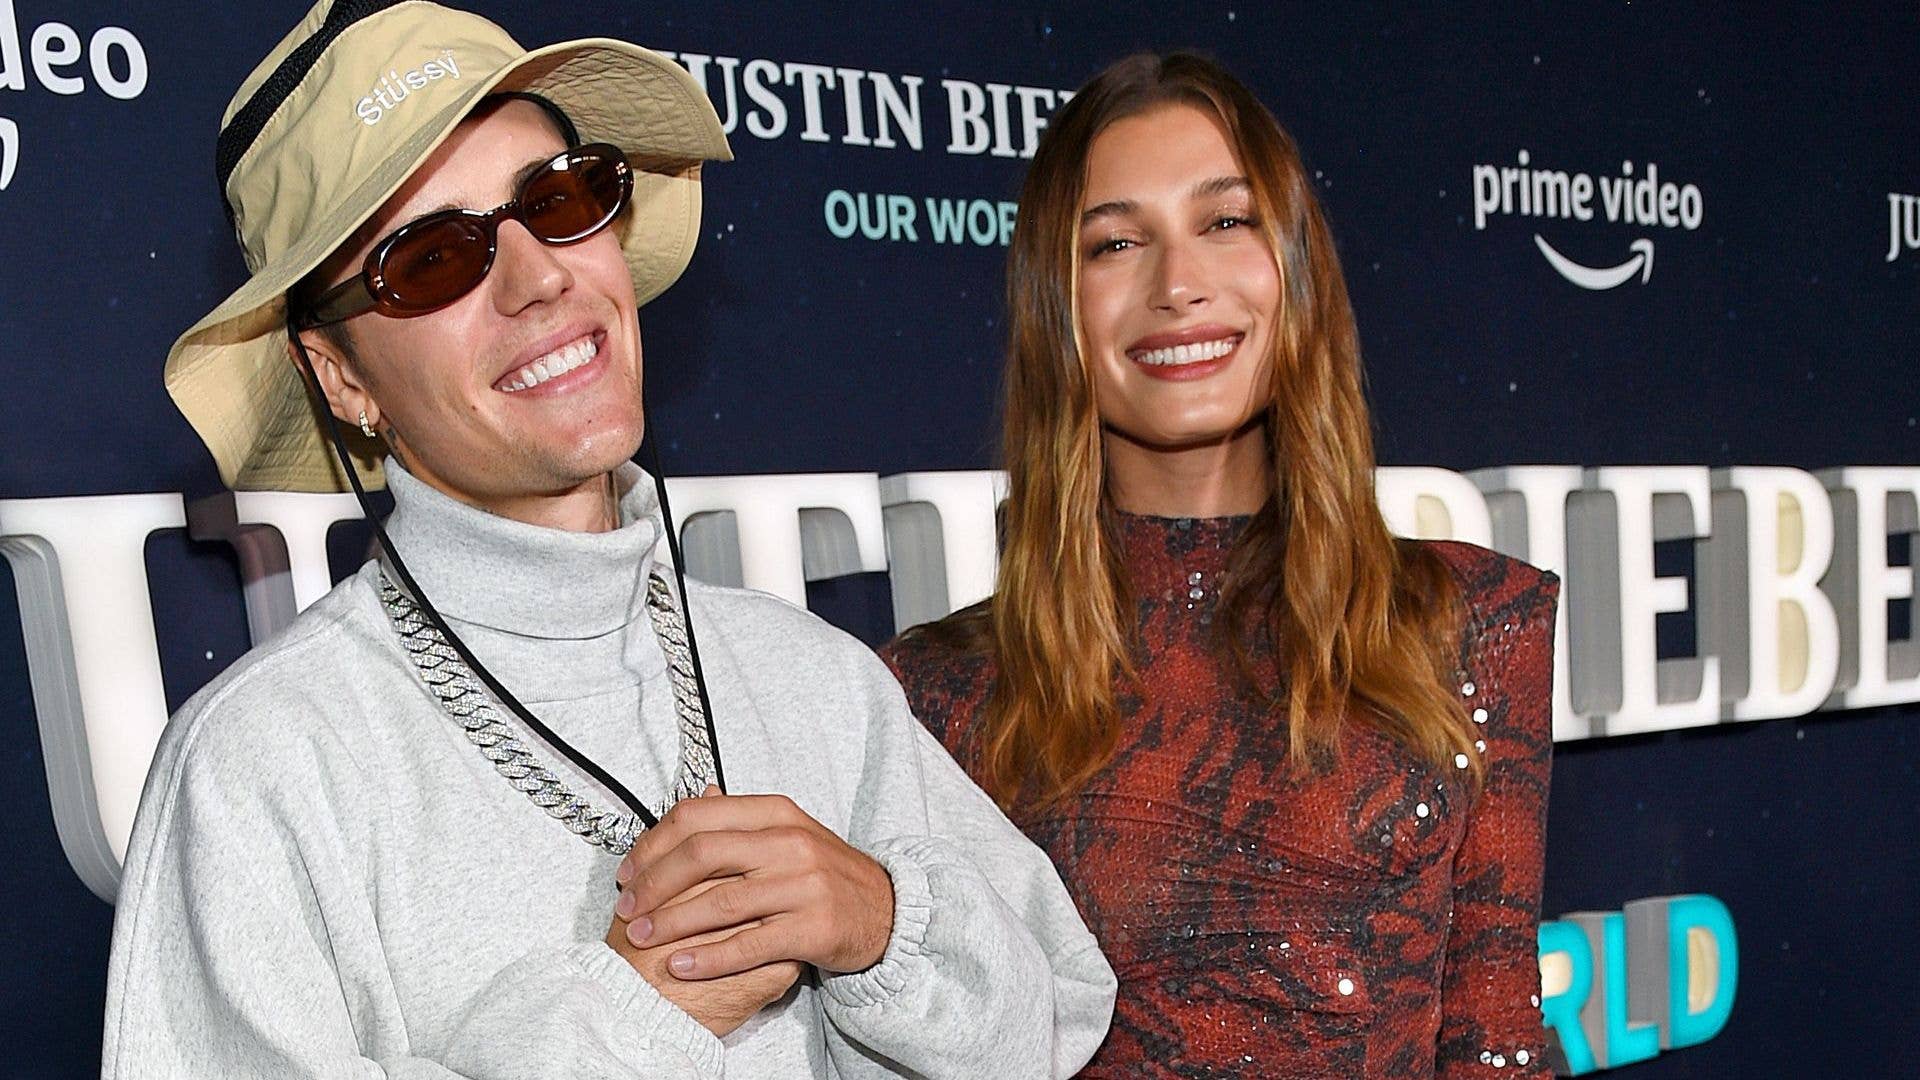 Justin Bieber and Hailey Bieber attend the 'Justin Bieber: Our World' event